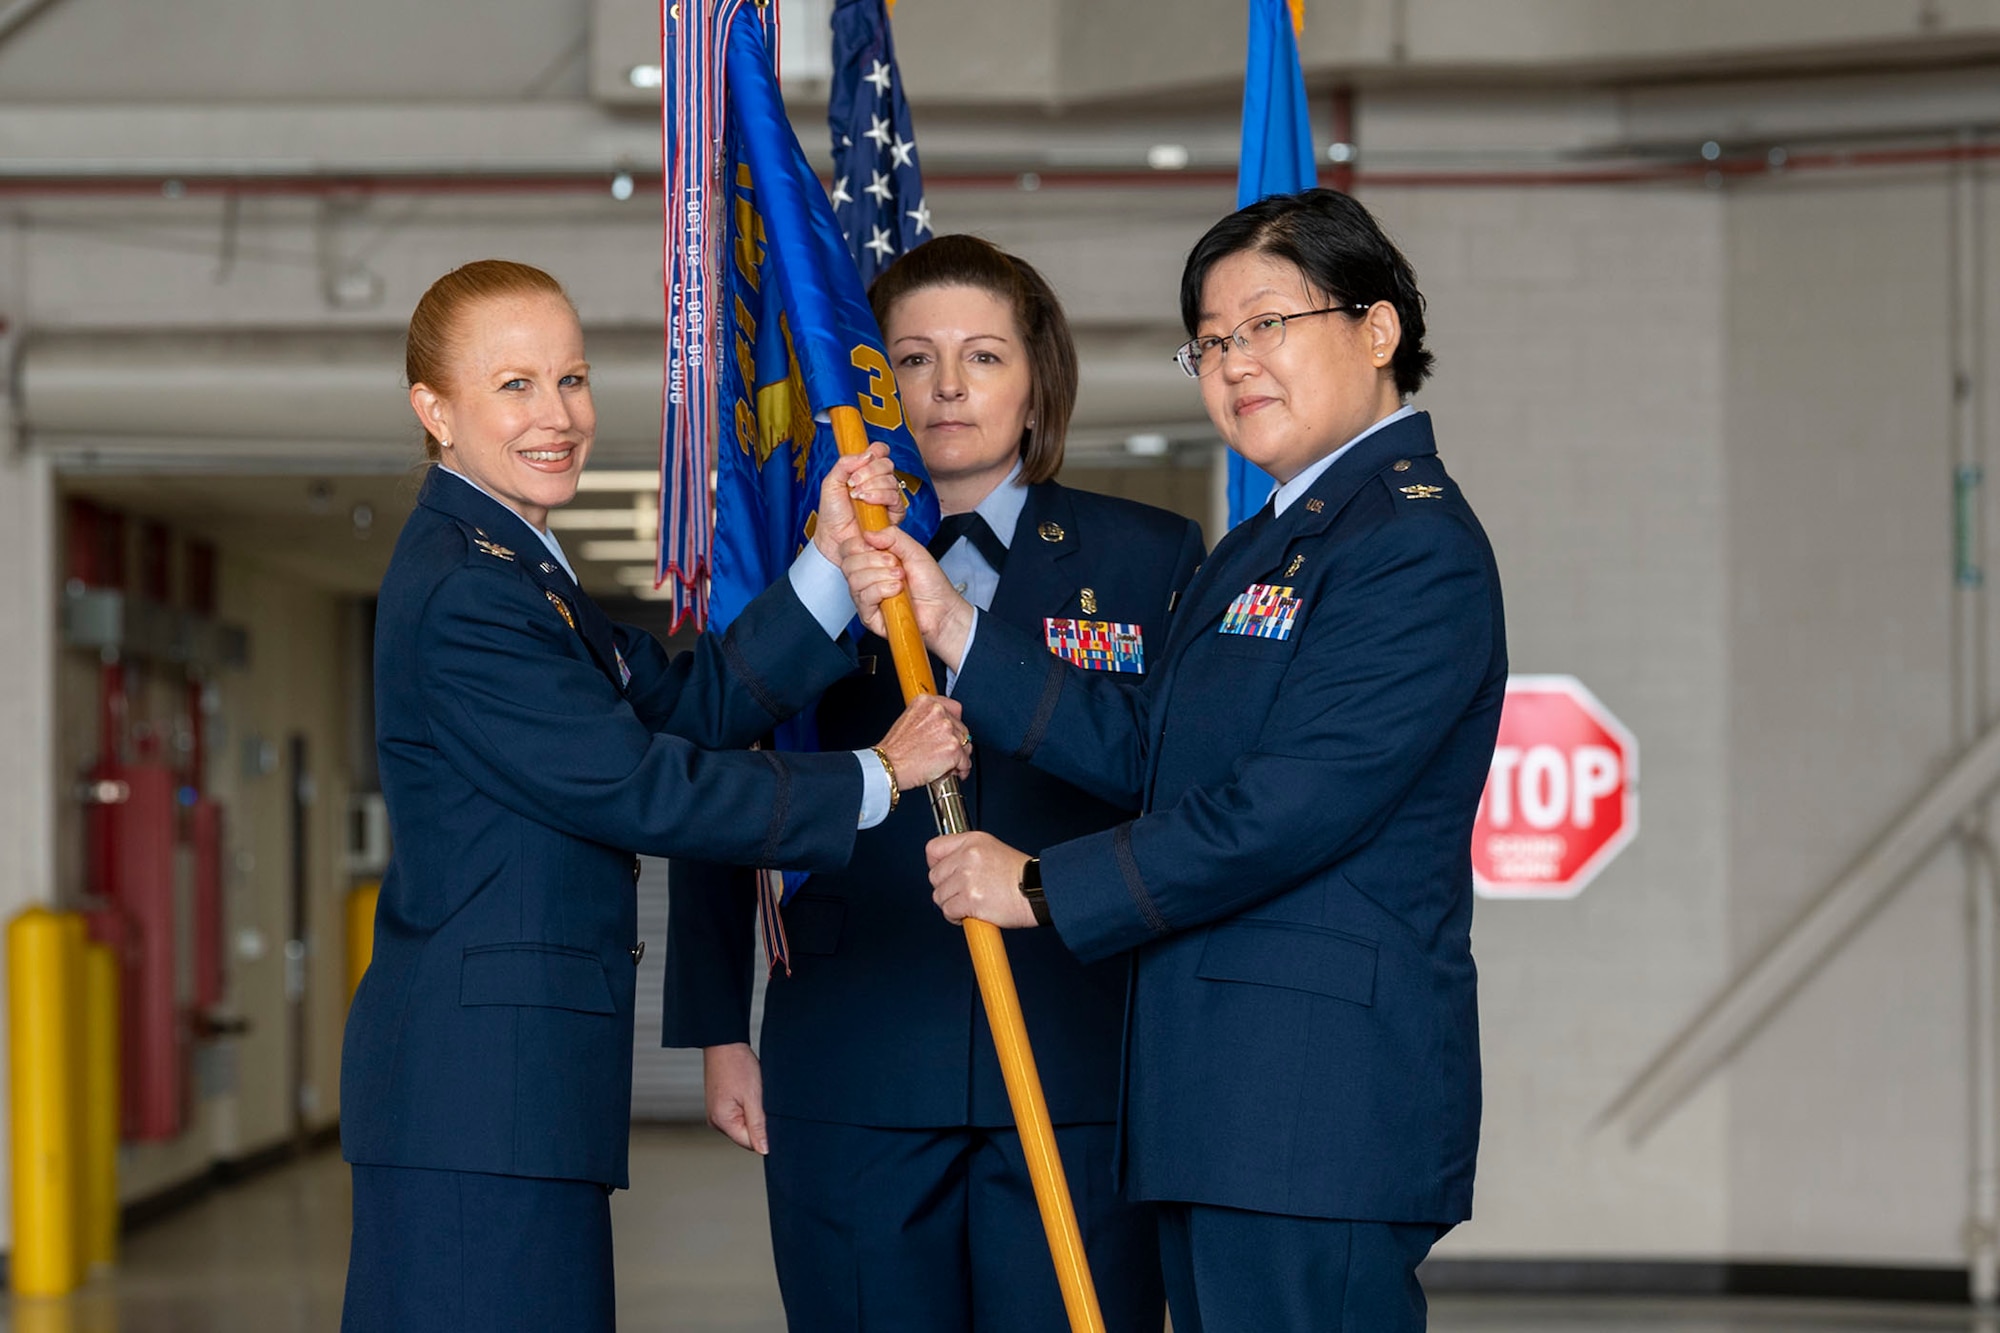 Col. Soo Sohn, right, accepts command of the 341st Medical Group from Col. Anita Feugate Opperman, 341st Missile Wing commander, during a change of command ceremony June 10, 2022, at Malmstrom Air Force Base, Mont. Guidon bearer Chief Master Sgt. Kristi Binard, 341st MDG senior enlisted leader, looks on. (U.S. Air Force photo by Airman 1st Class Elijah Van Zandt)